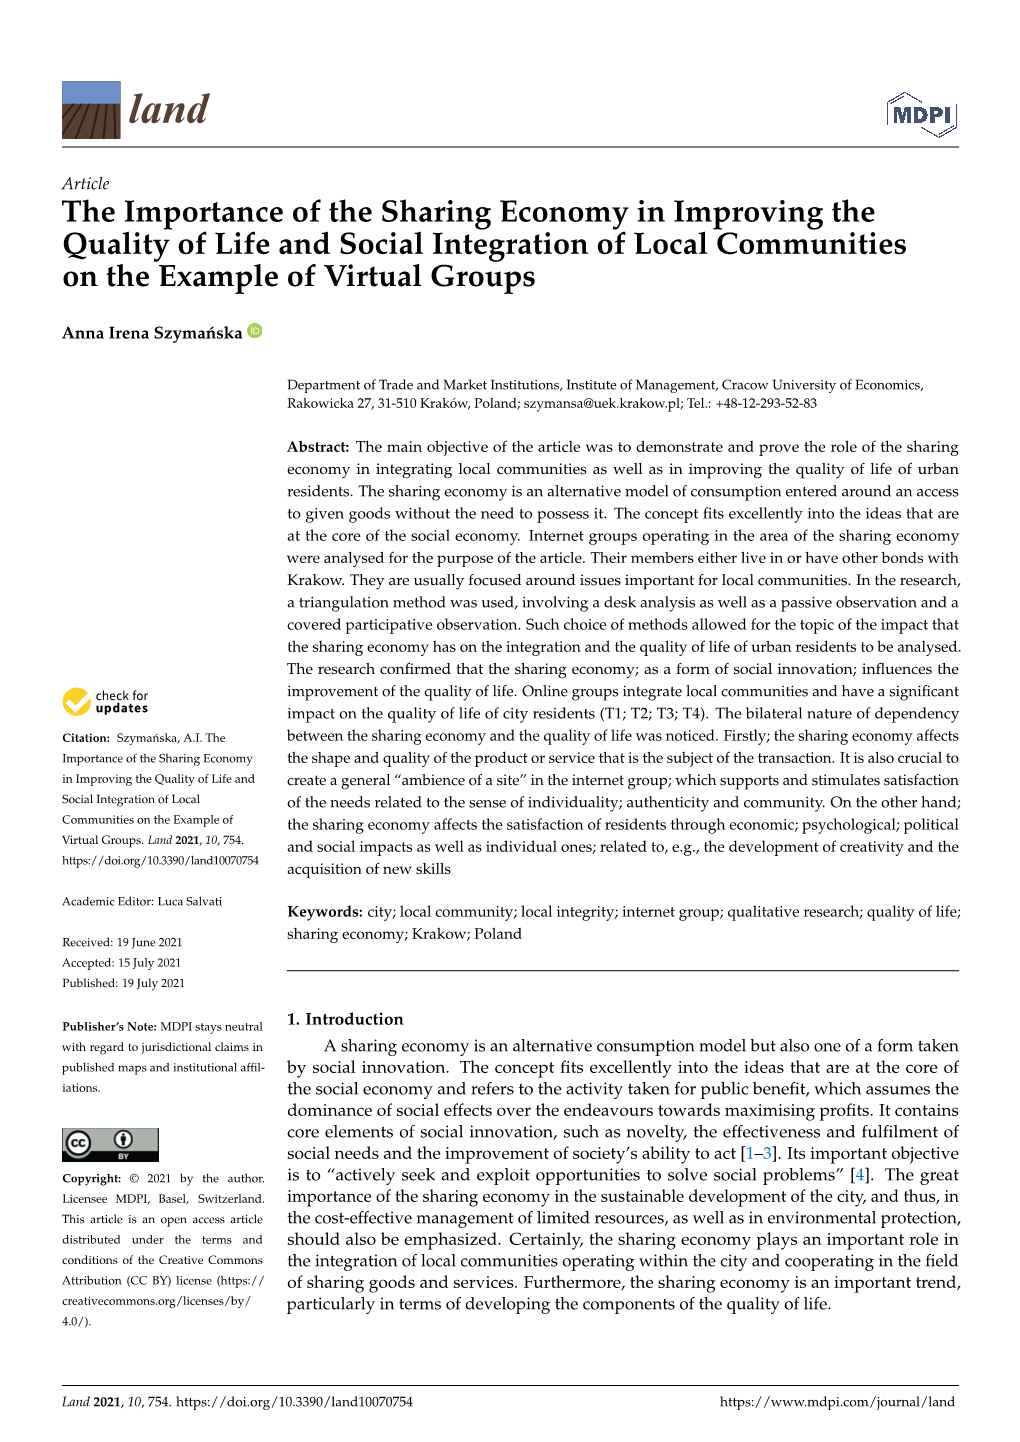 The Importance of the Sharing Economy in Improving the Quality of Life and Social Integration of Local Communities on the Example of Virtual Groups